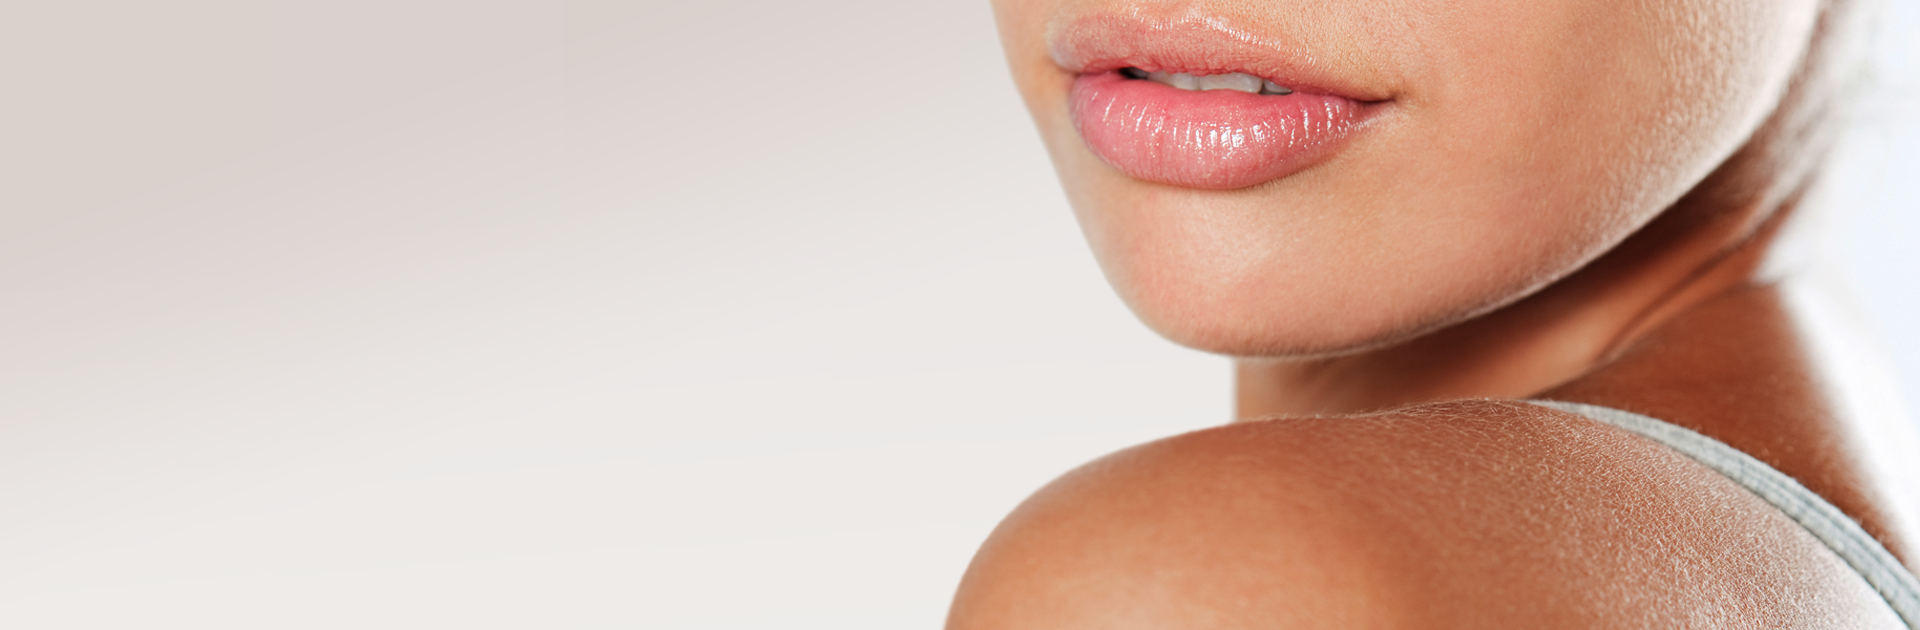 Lip augmentation with hyaluronic acid